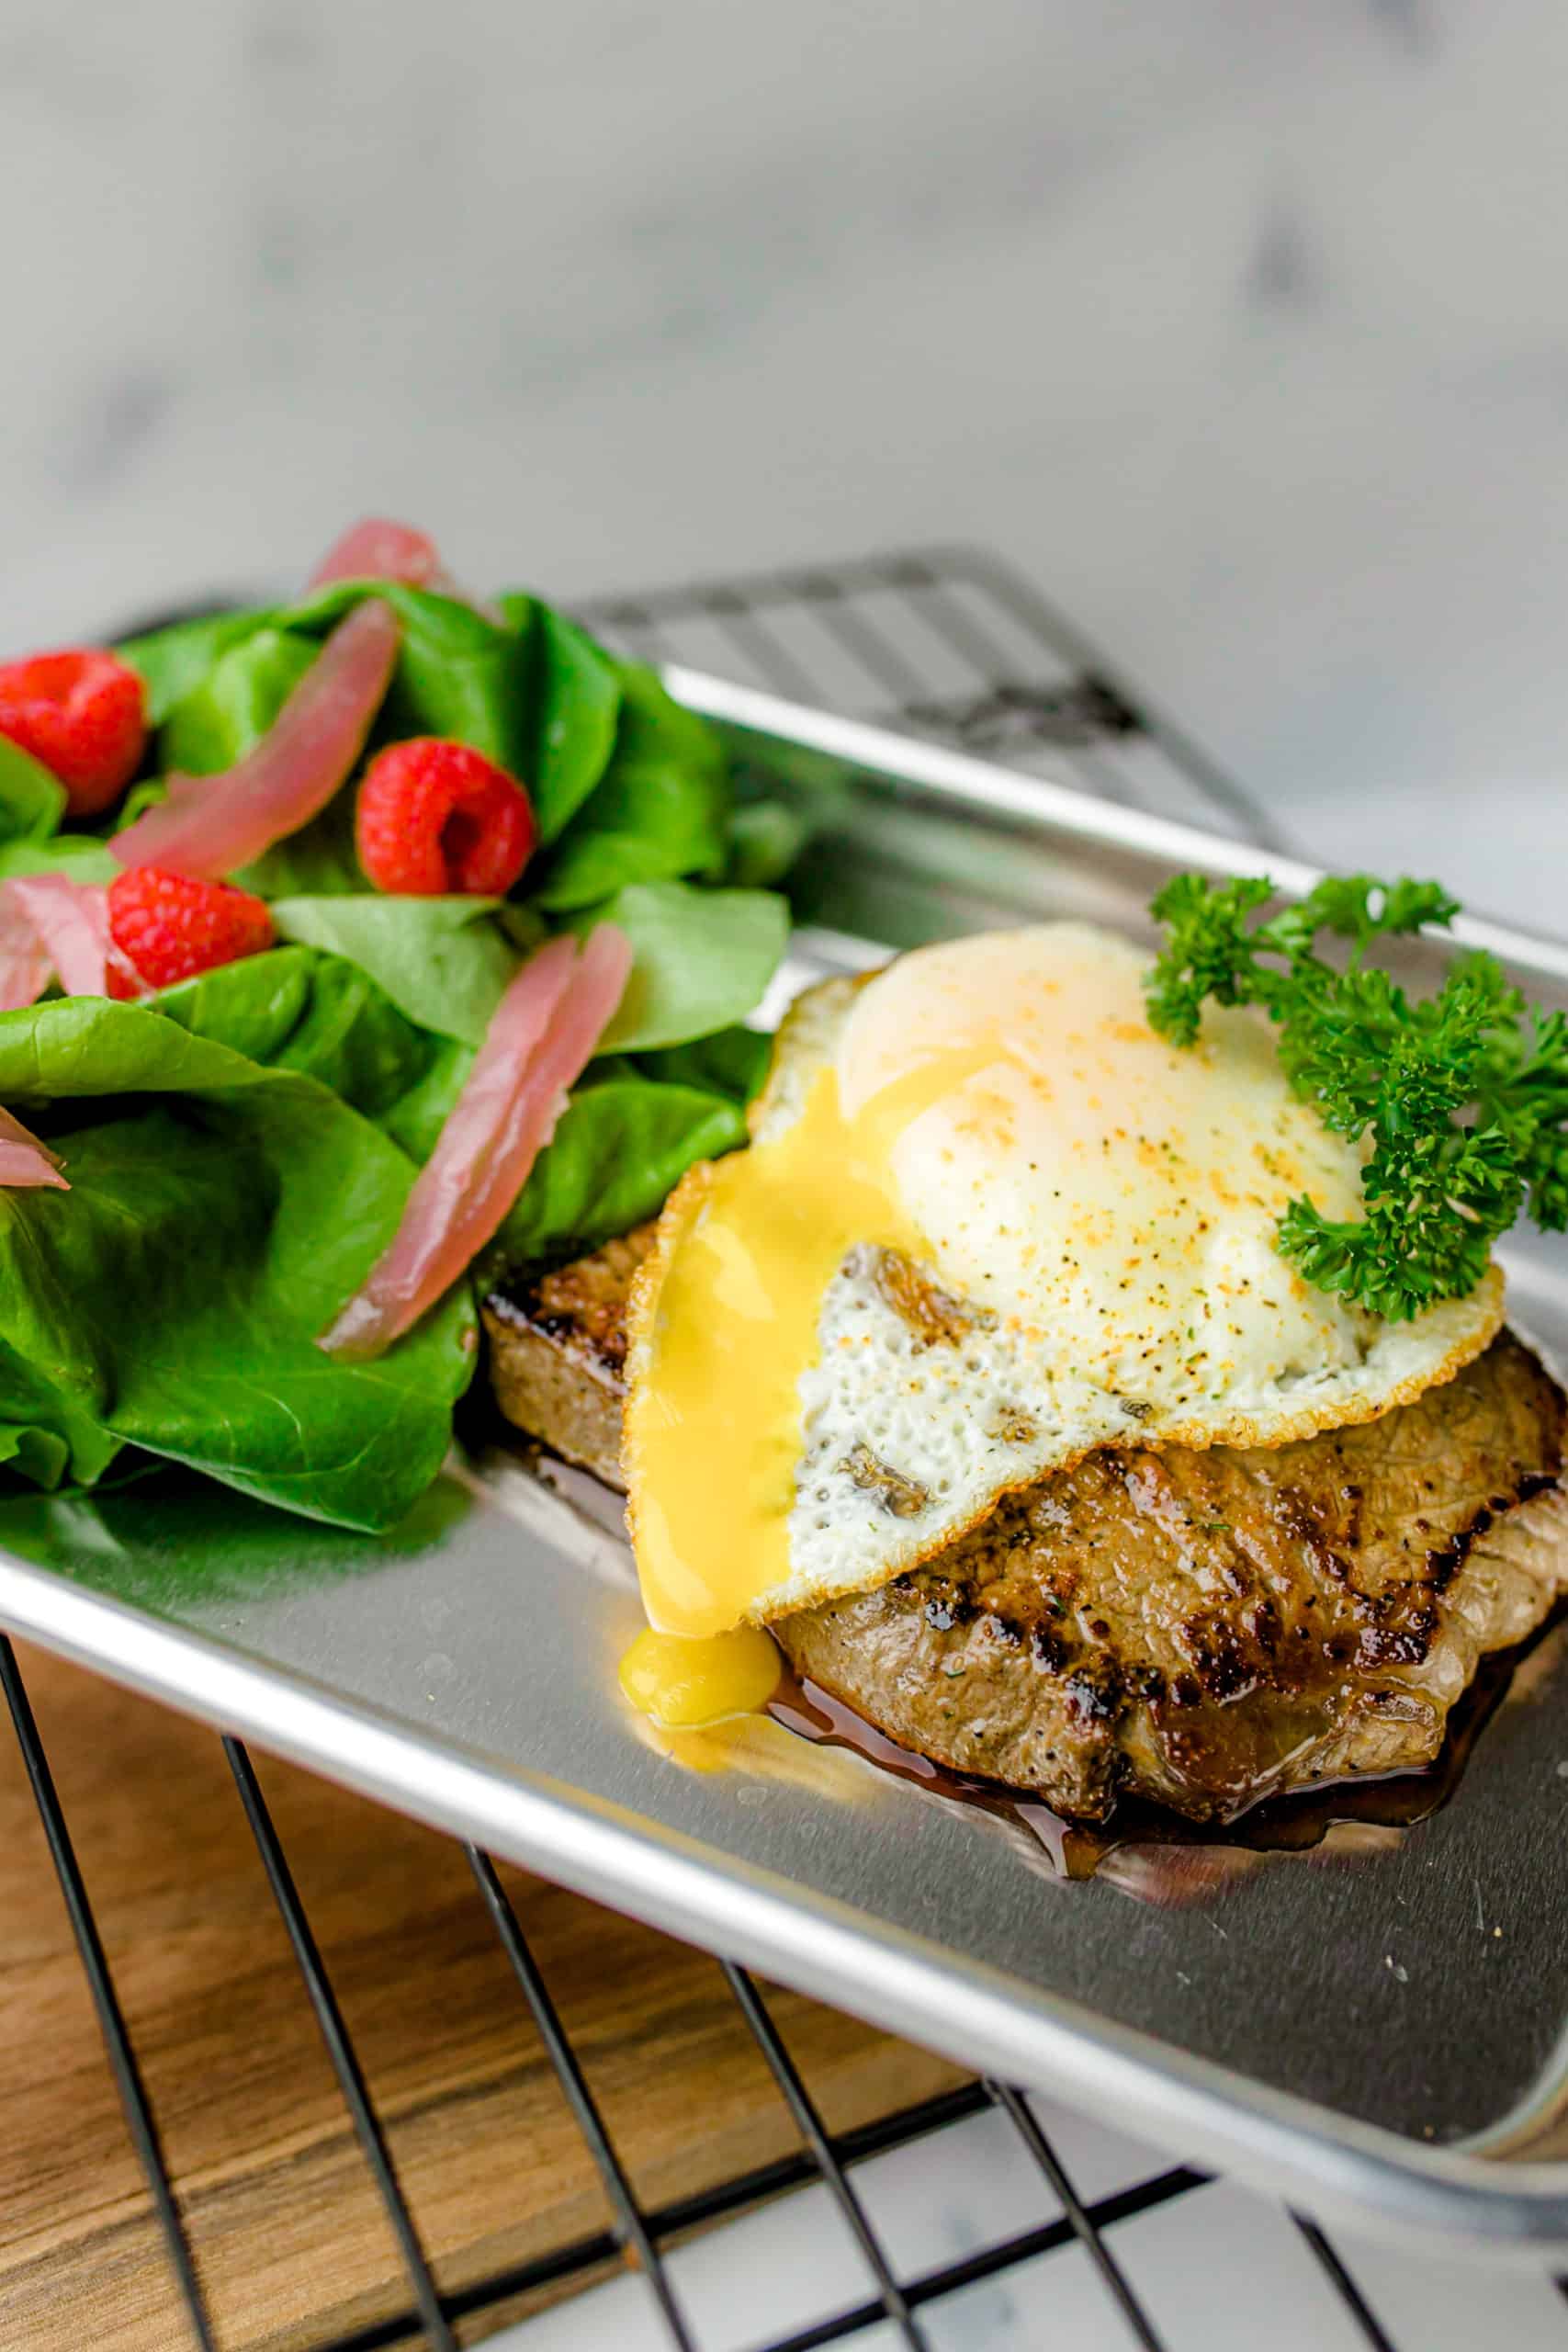 https://frommichigantothetable.com/wp-content/uploads/2022/06/Blackstone-Steak-and-Eggs-scaled.jpg